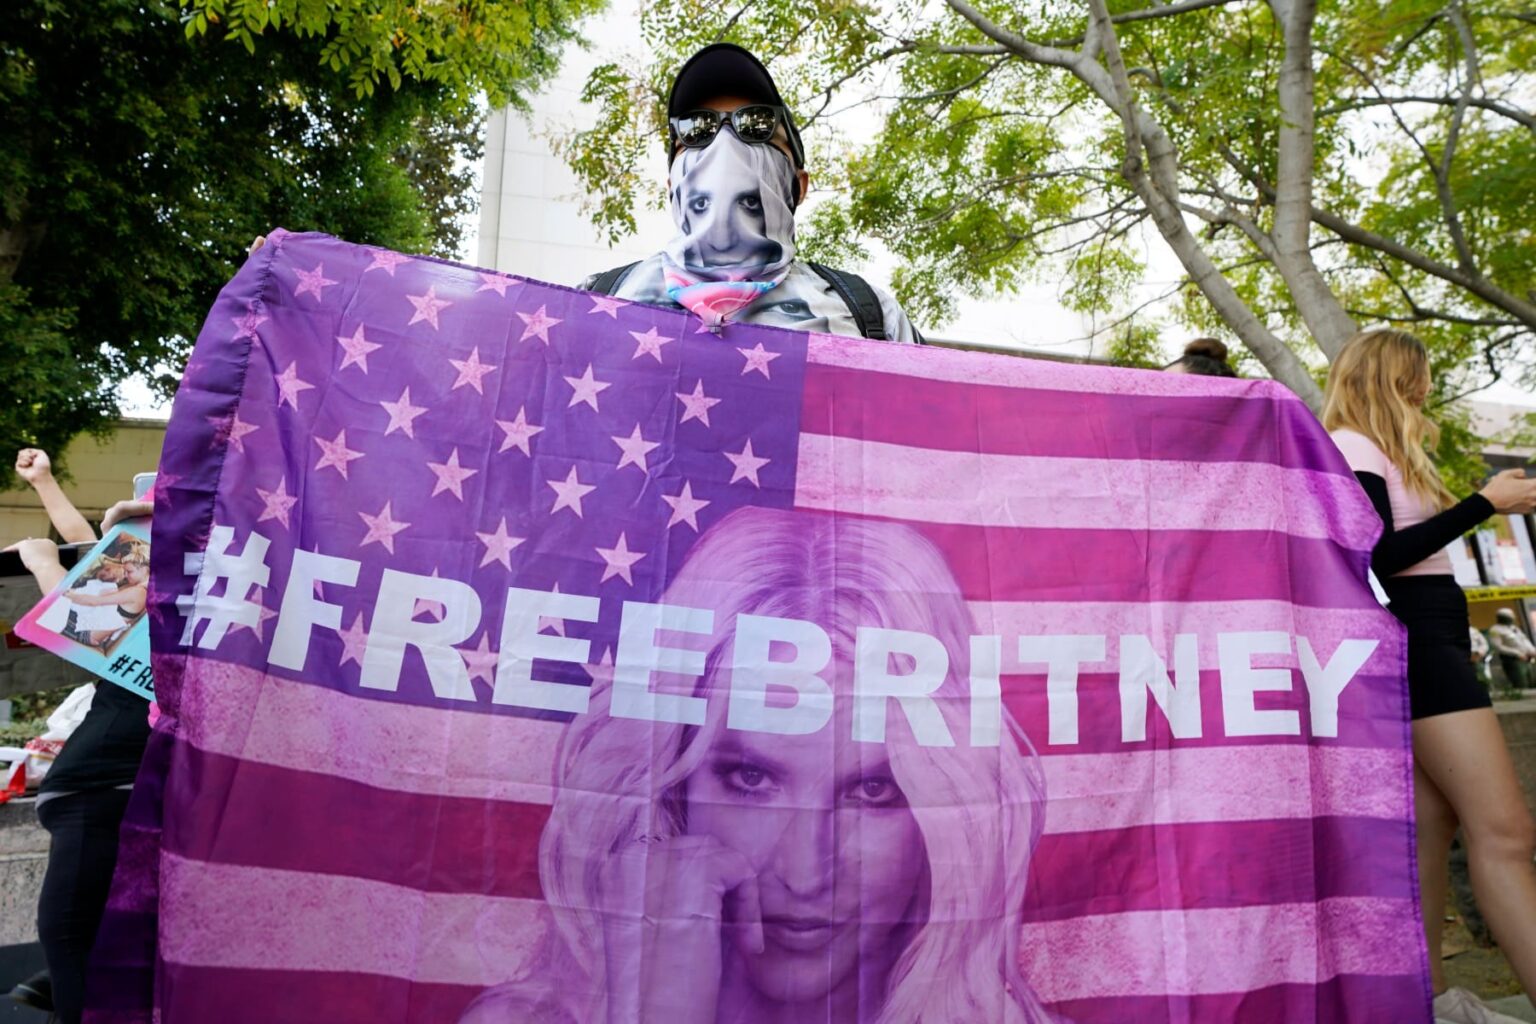 As Britney Spears heads toward freedom, what can we expect from the singer in the future? See where the Free Britney movement will lead the icon.